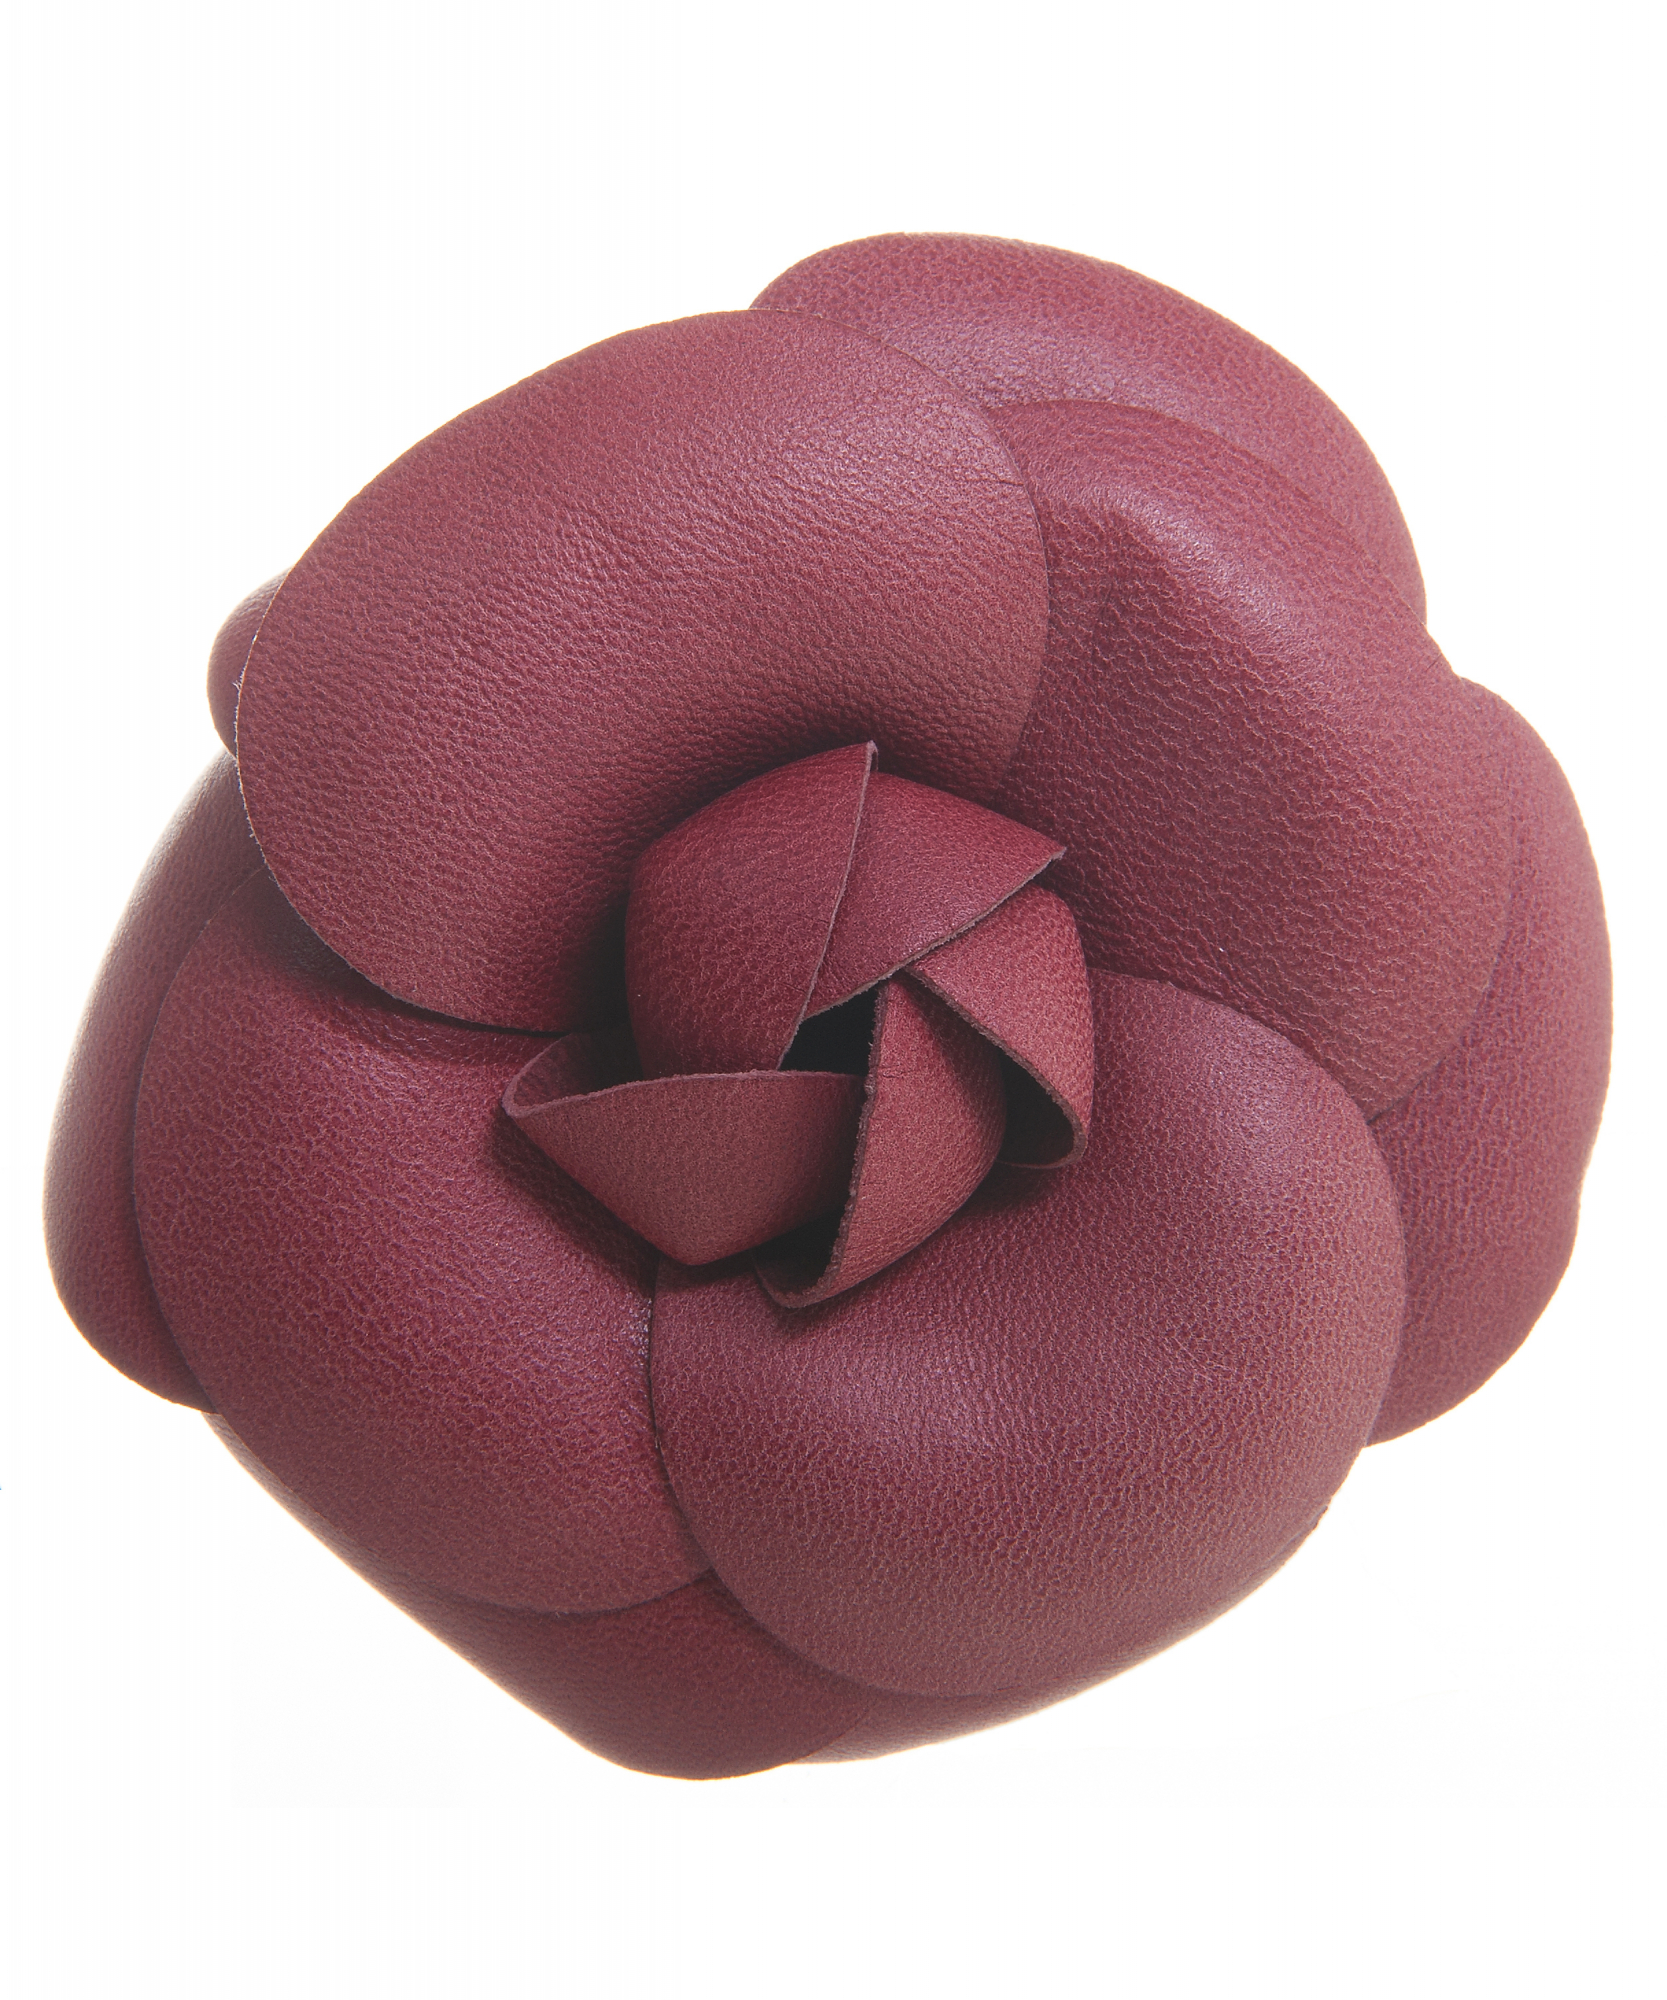 Chanel Vintage - Fabric Camellia Brooch - Red - Brooch Chanel